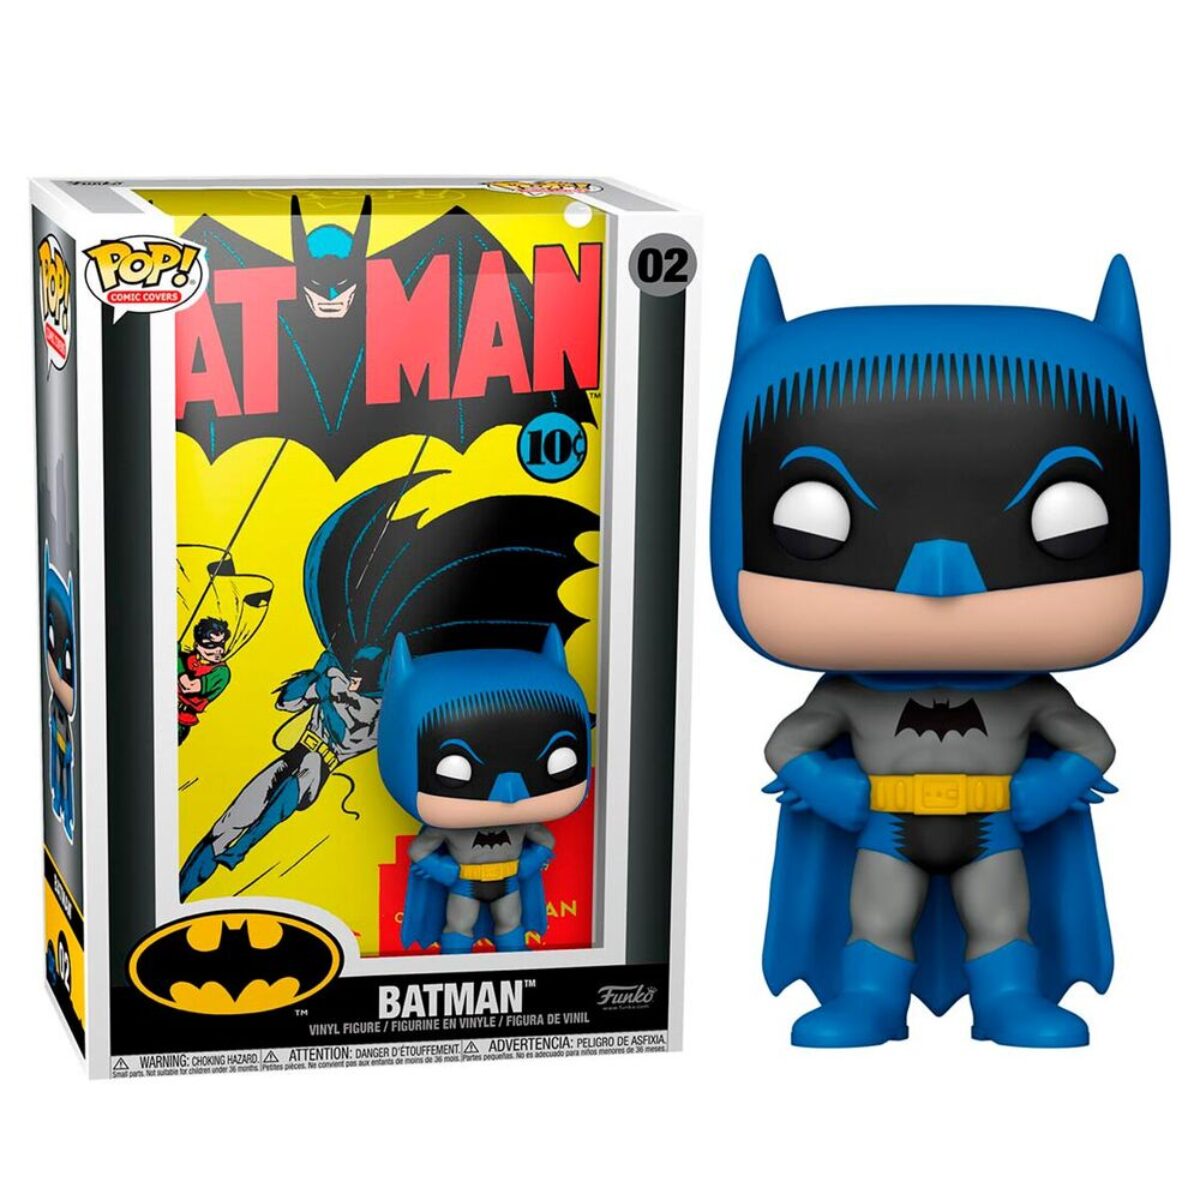 Mega Pop! 18 Inch Batman DC Funko Pop! #01 | New In Box. Sold Out In Stores.